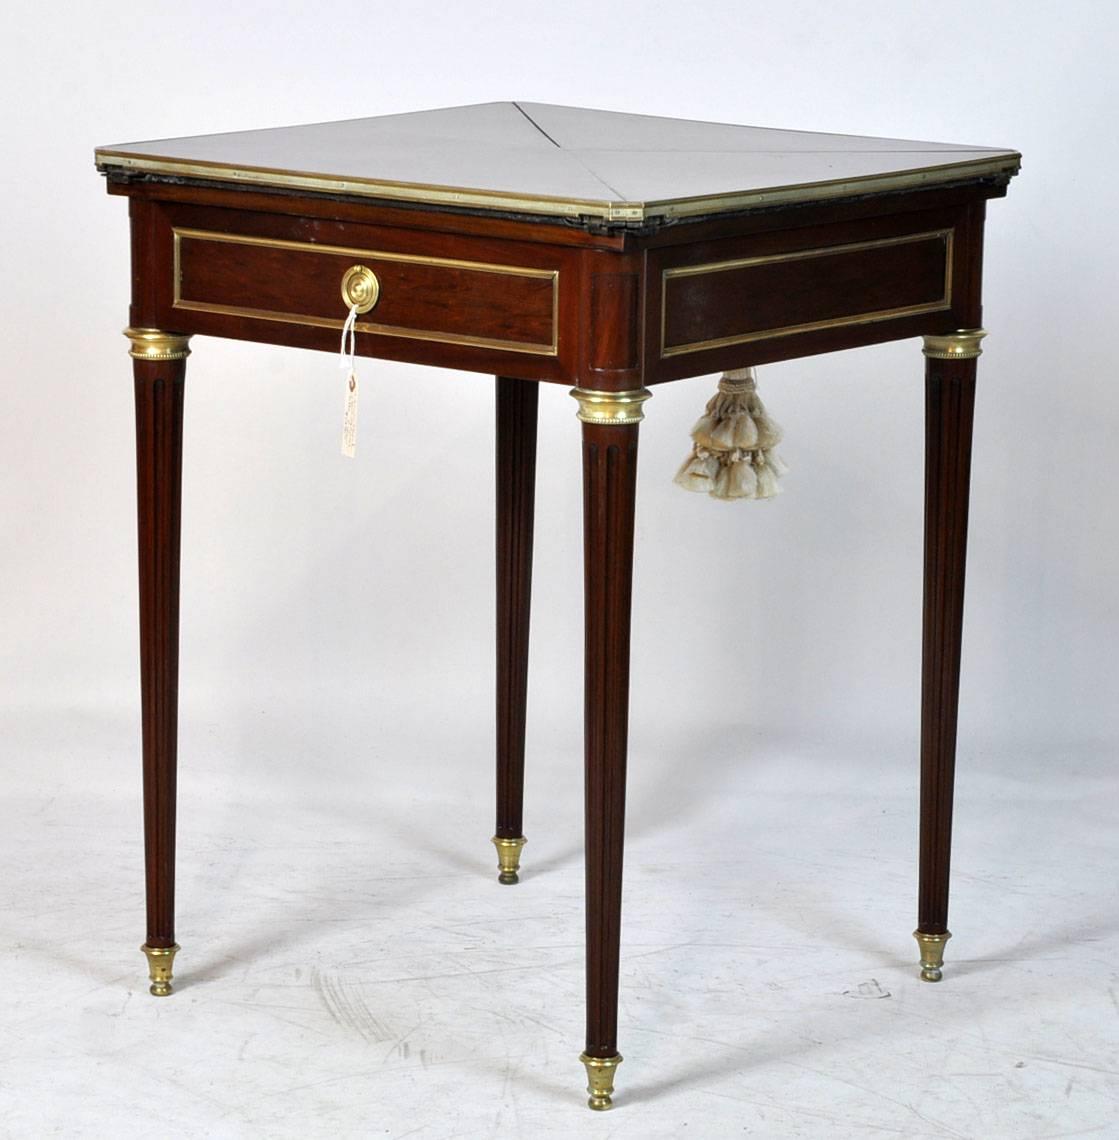 Late 19th century French handkerchief game table. Bronze mounts with spindle legs. Two drawers and fold out top to felt interior. Mahogany wood. Great condition.